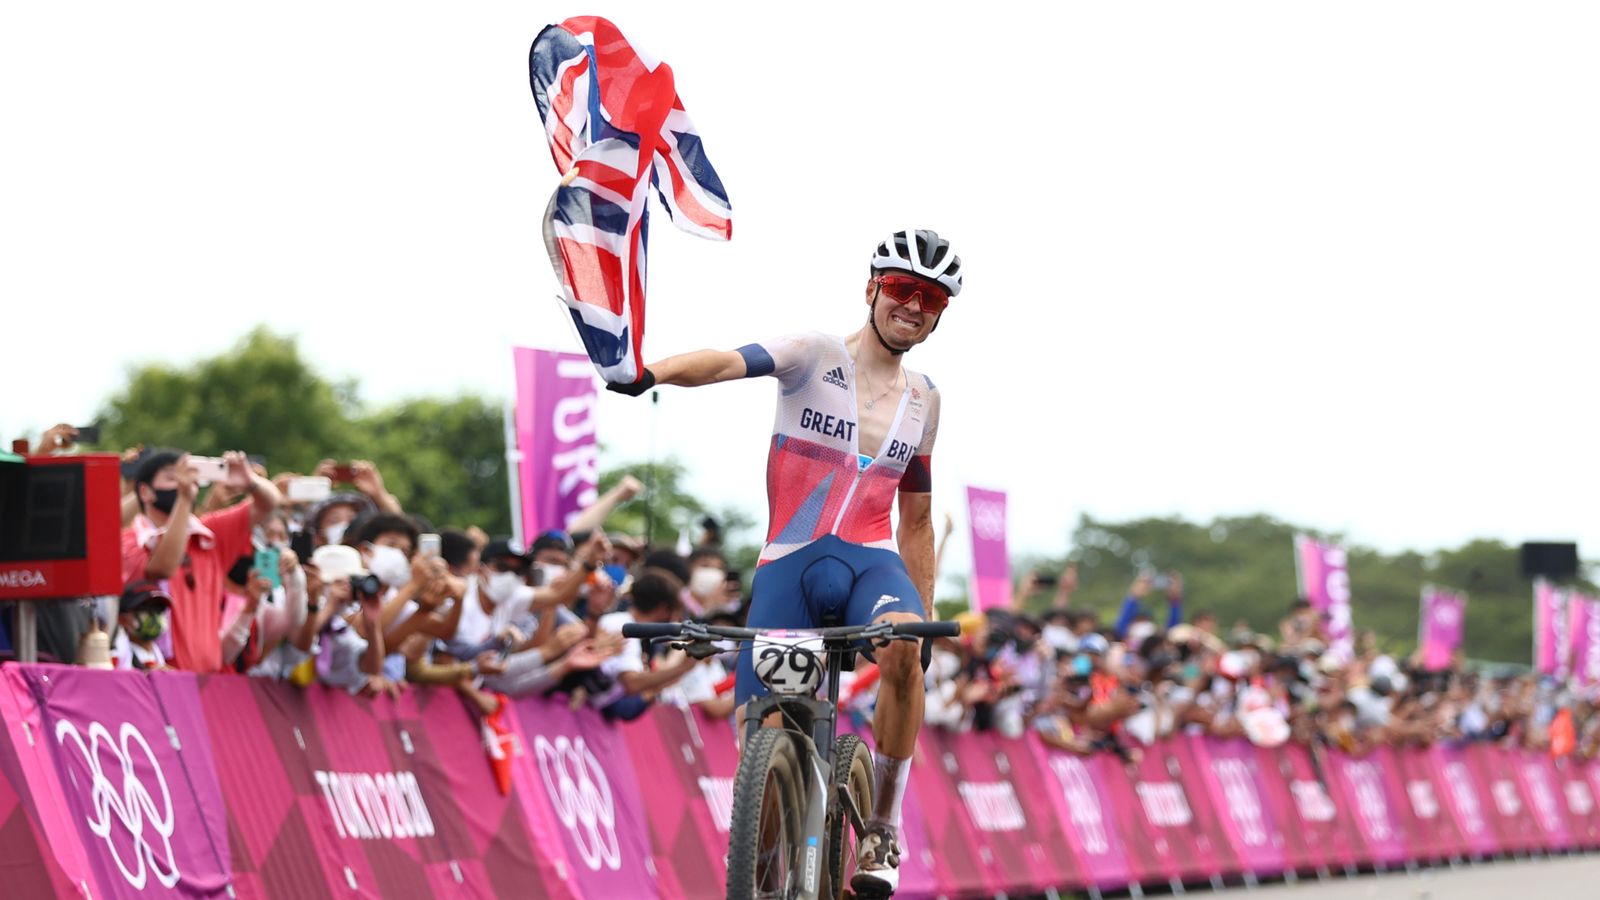 Tom Pidcock wins mountain bike gold – less than two months after breaking collarbone in crash